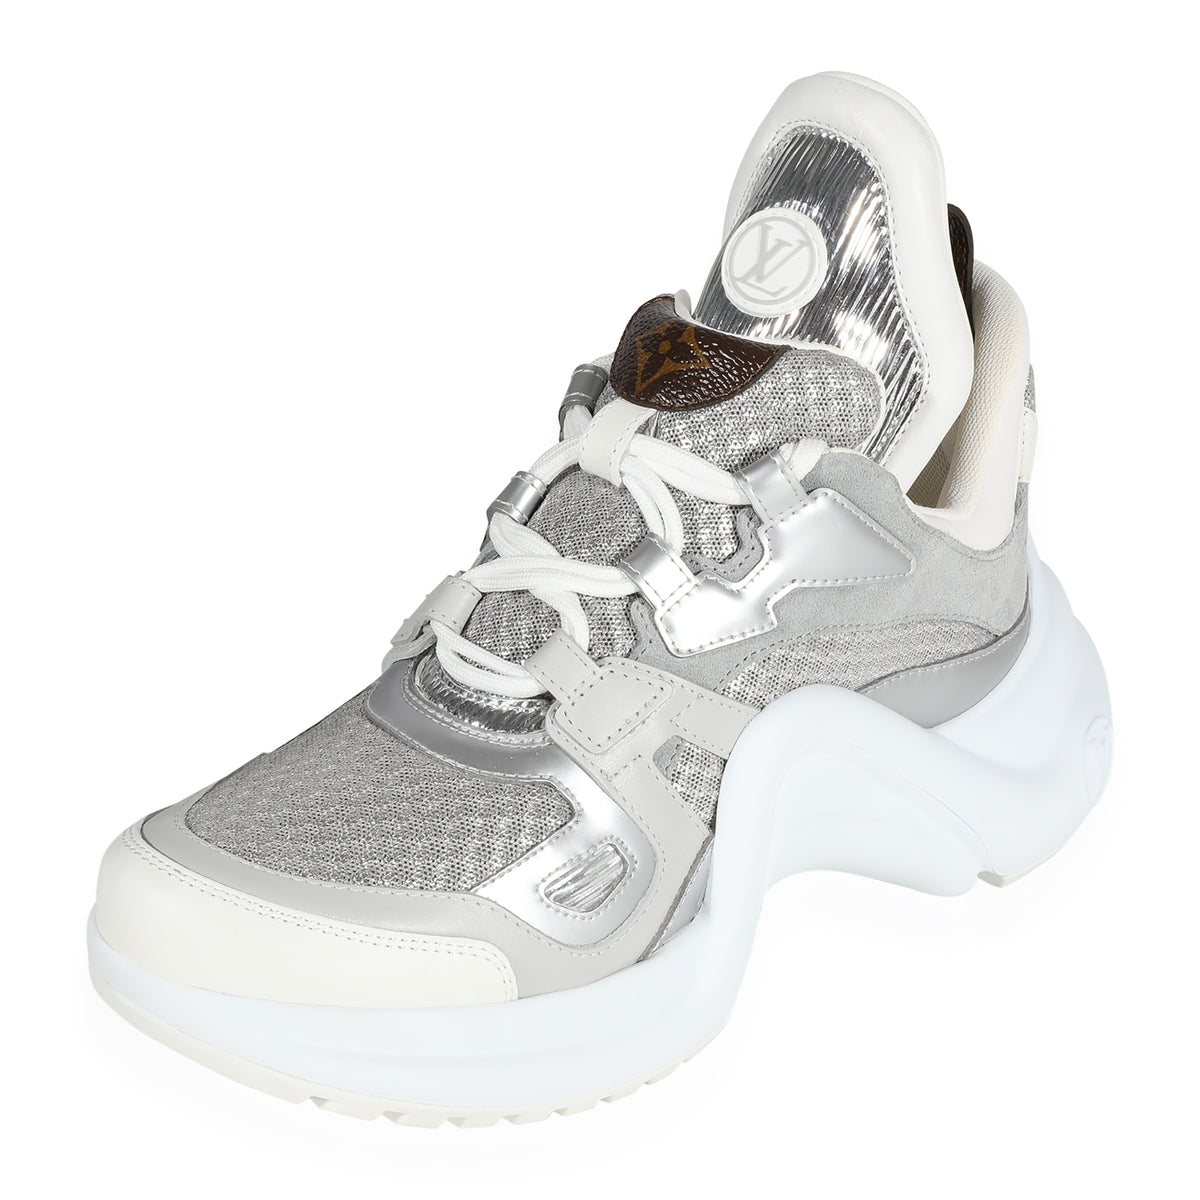 Louis Vuitton Archlight sneakers, Tiffany